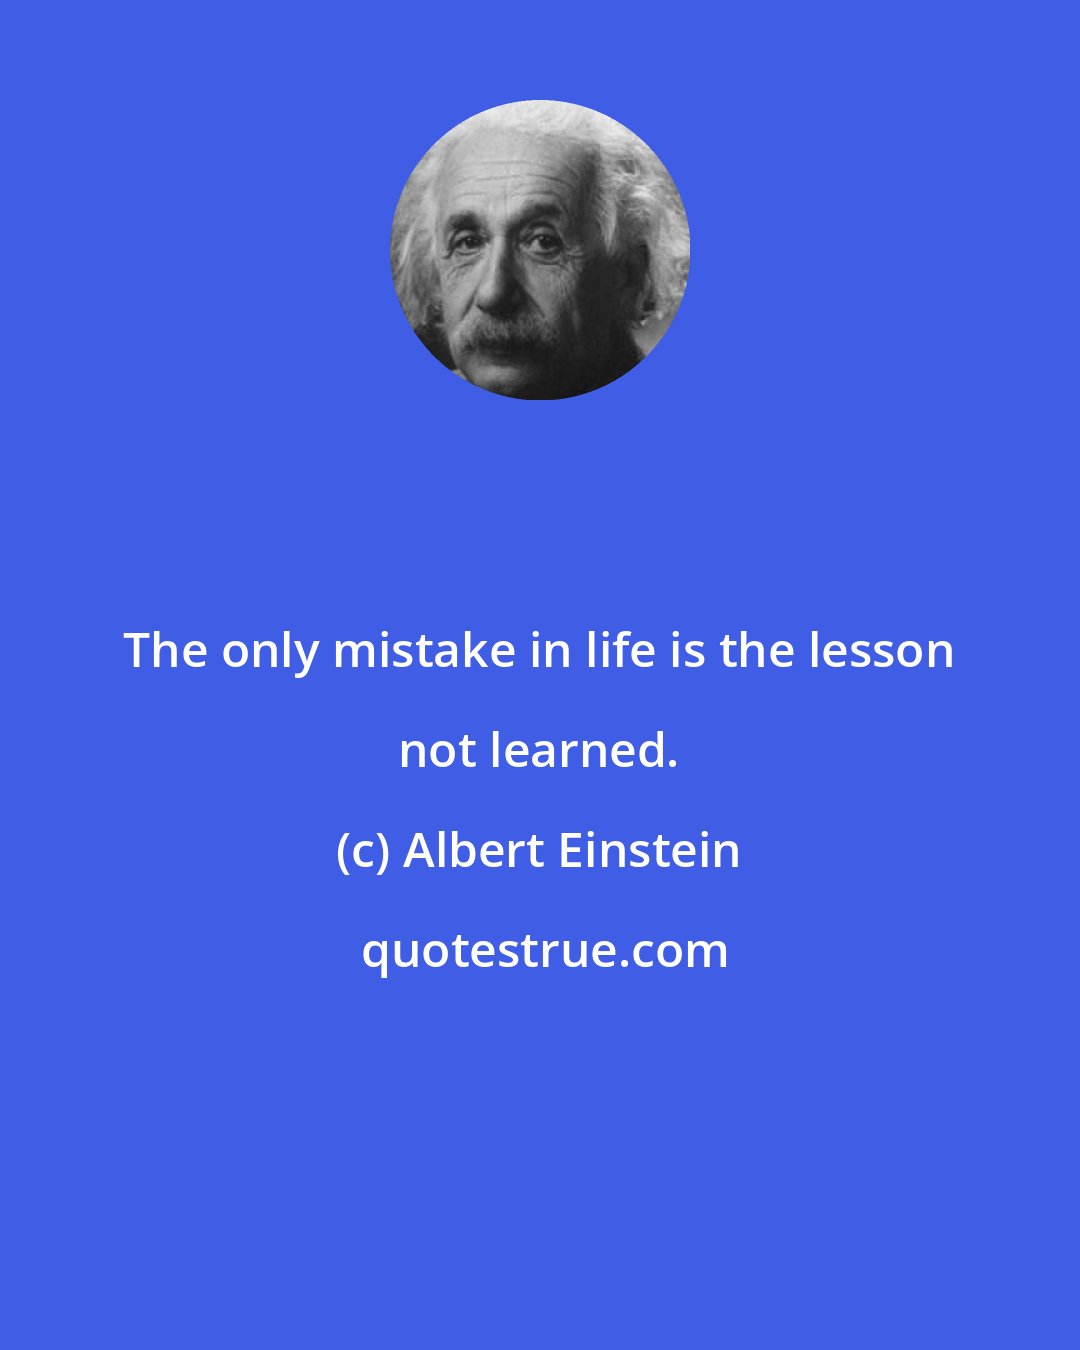 Albert Einstein: The only mistake in life is the lesson not learned.